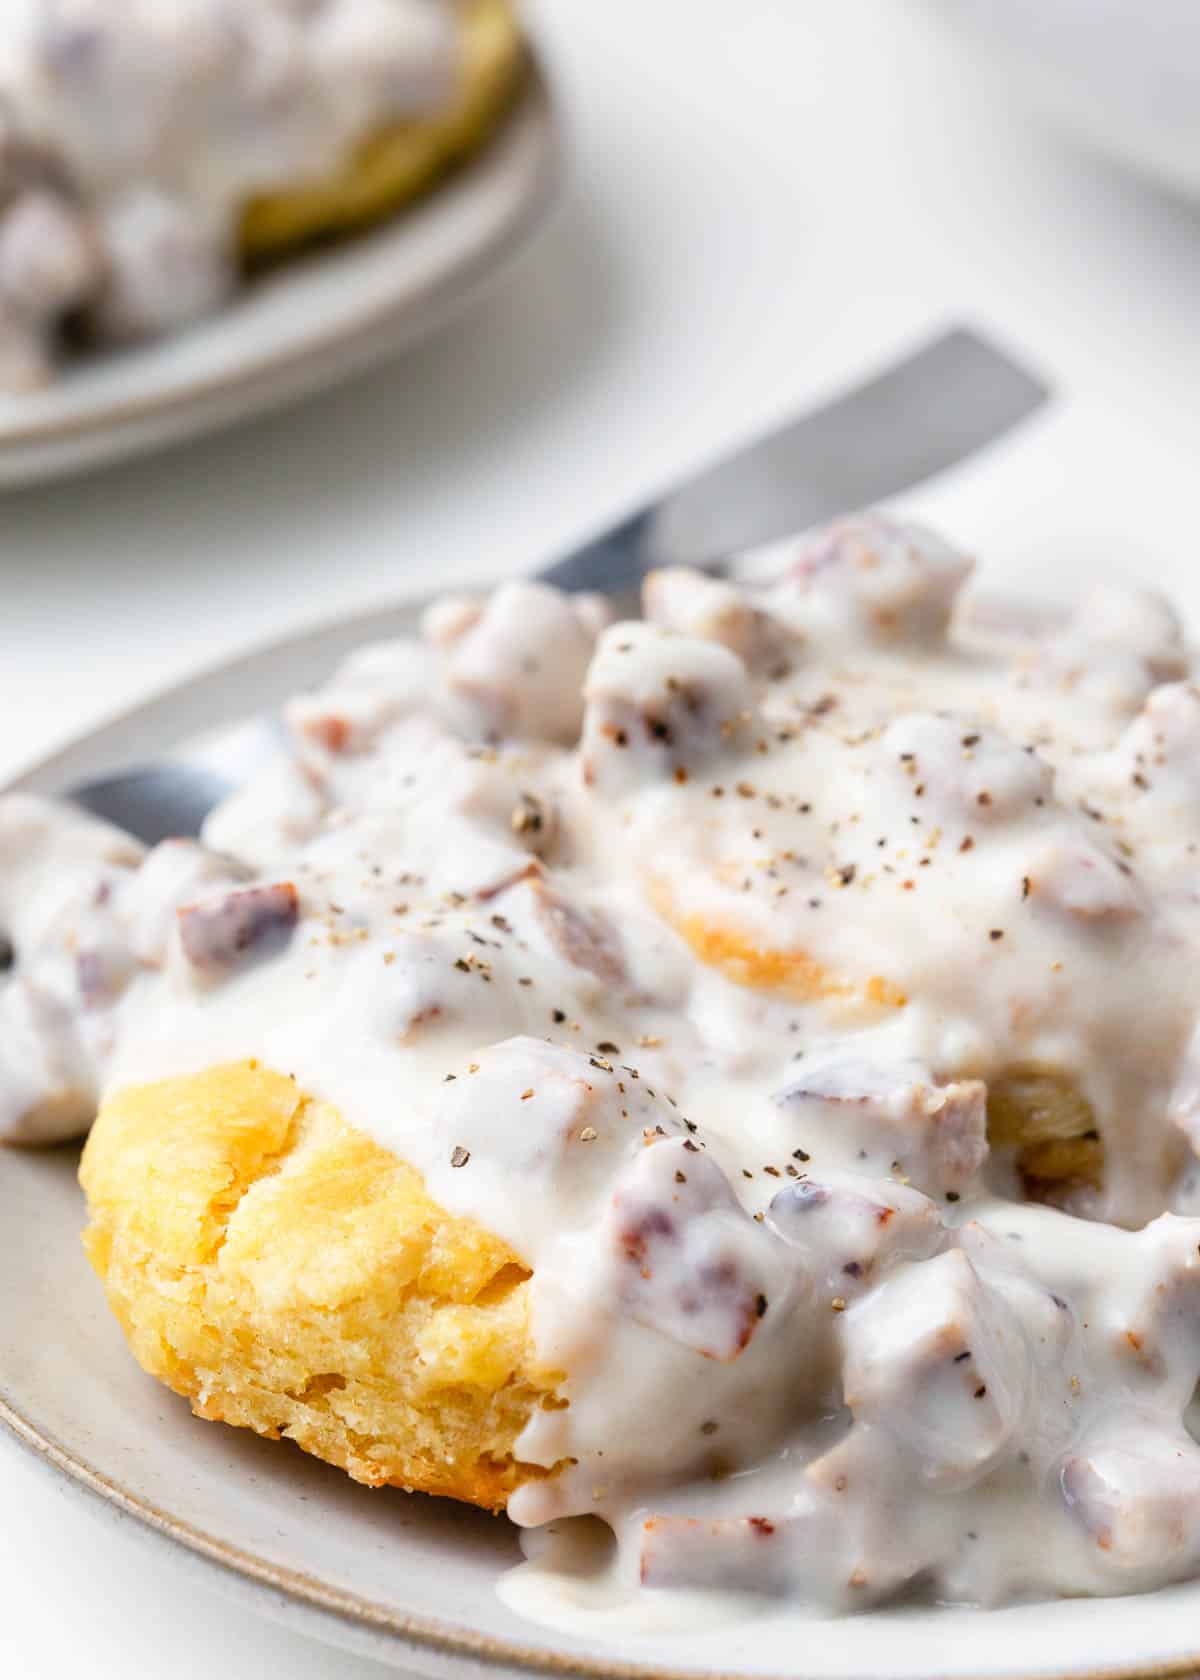 Biscuits and gravy on a plate with a fork.